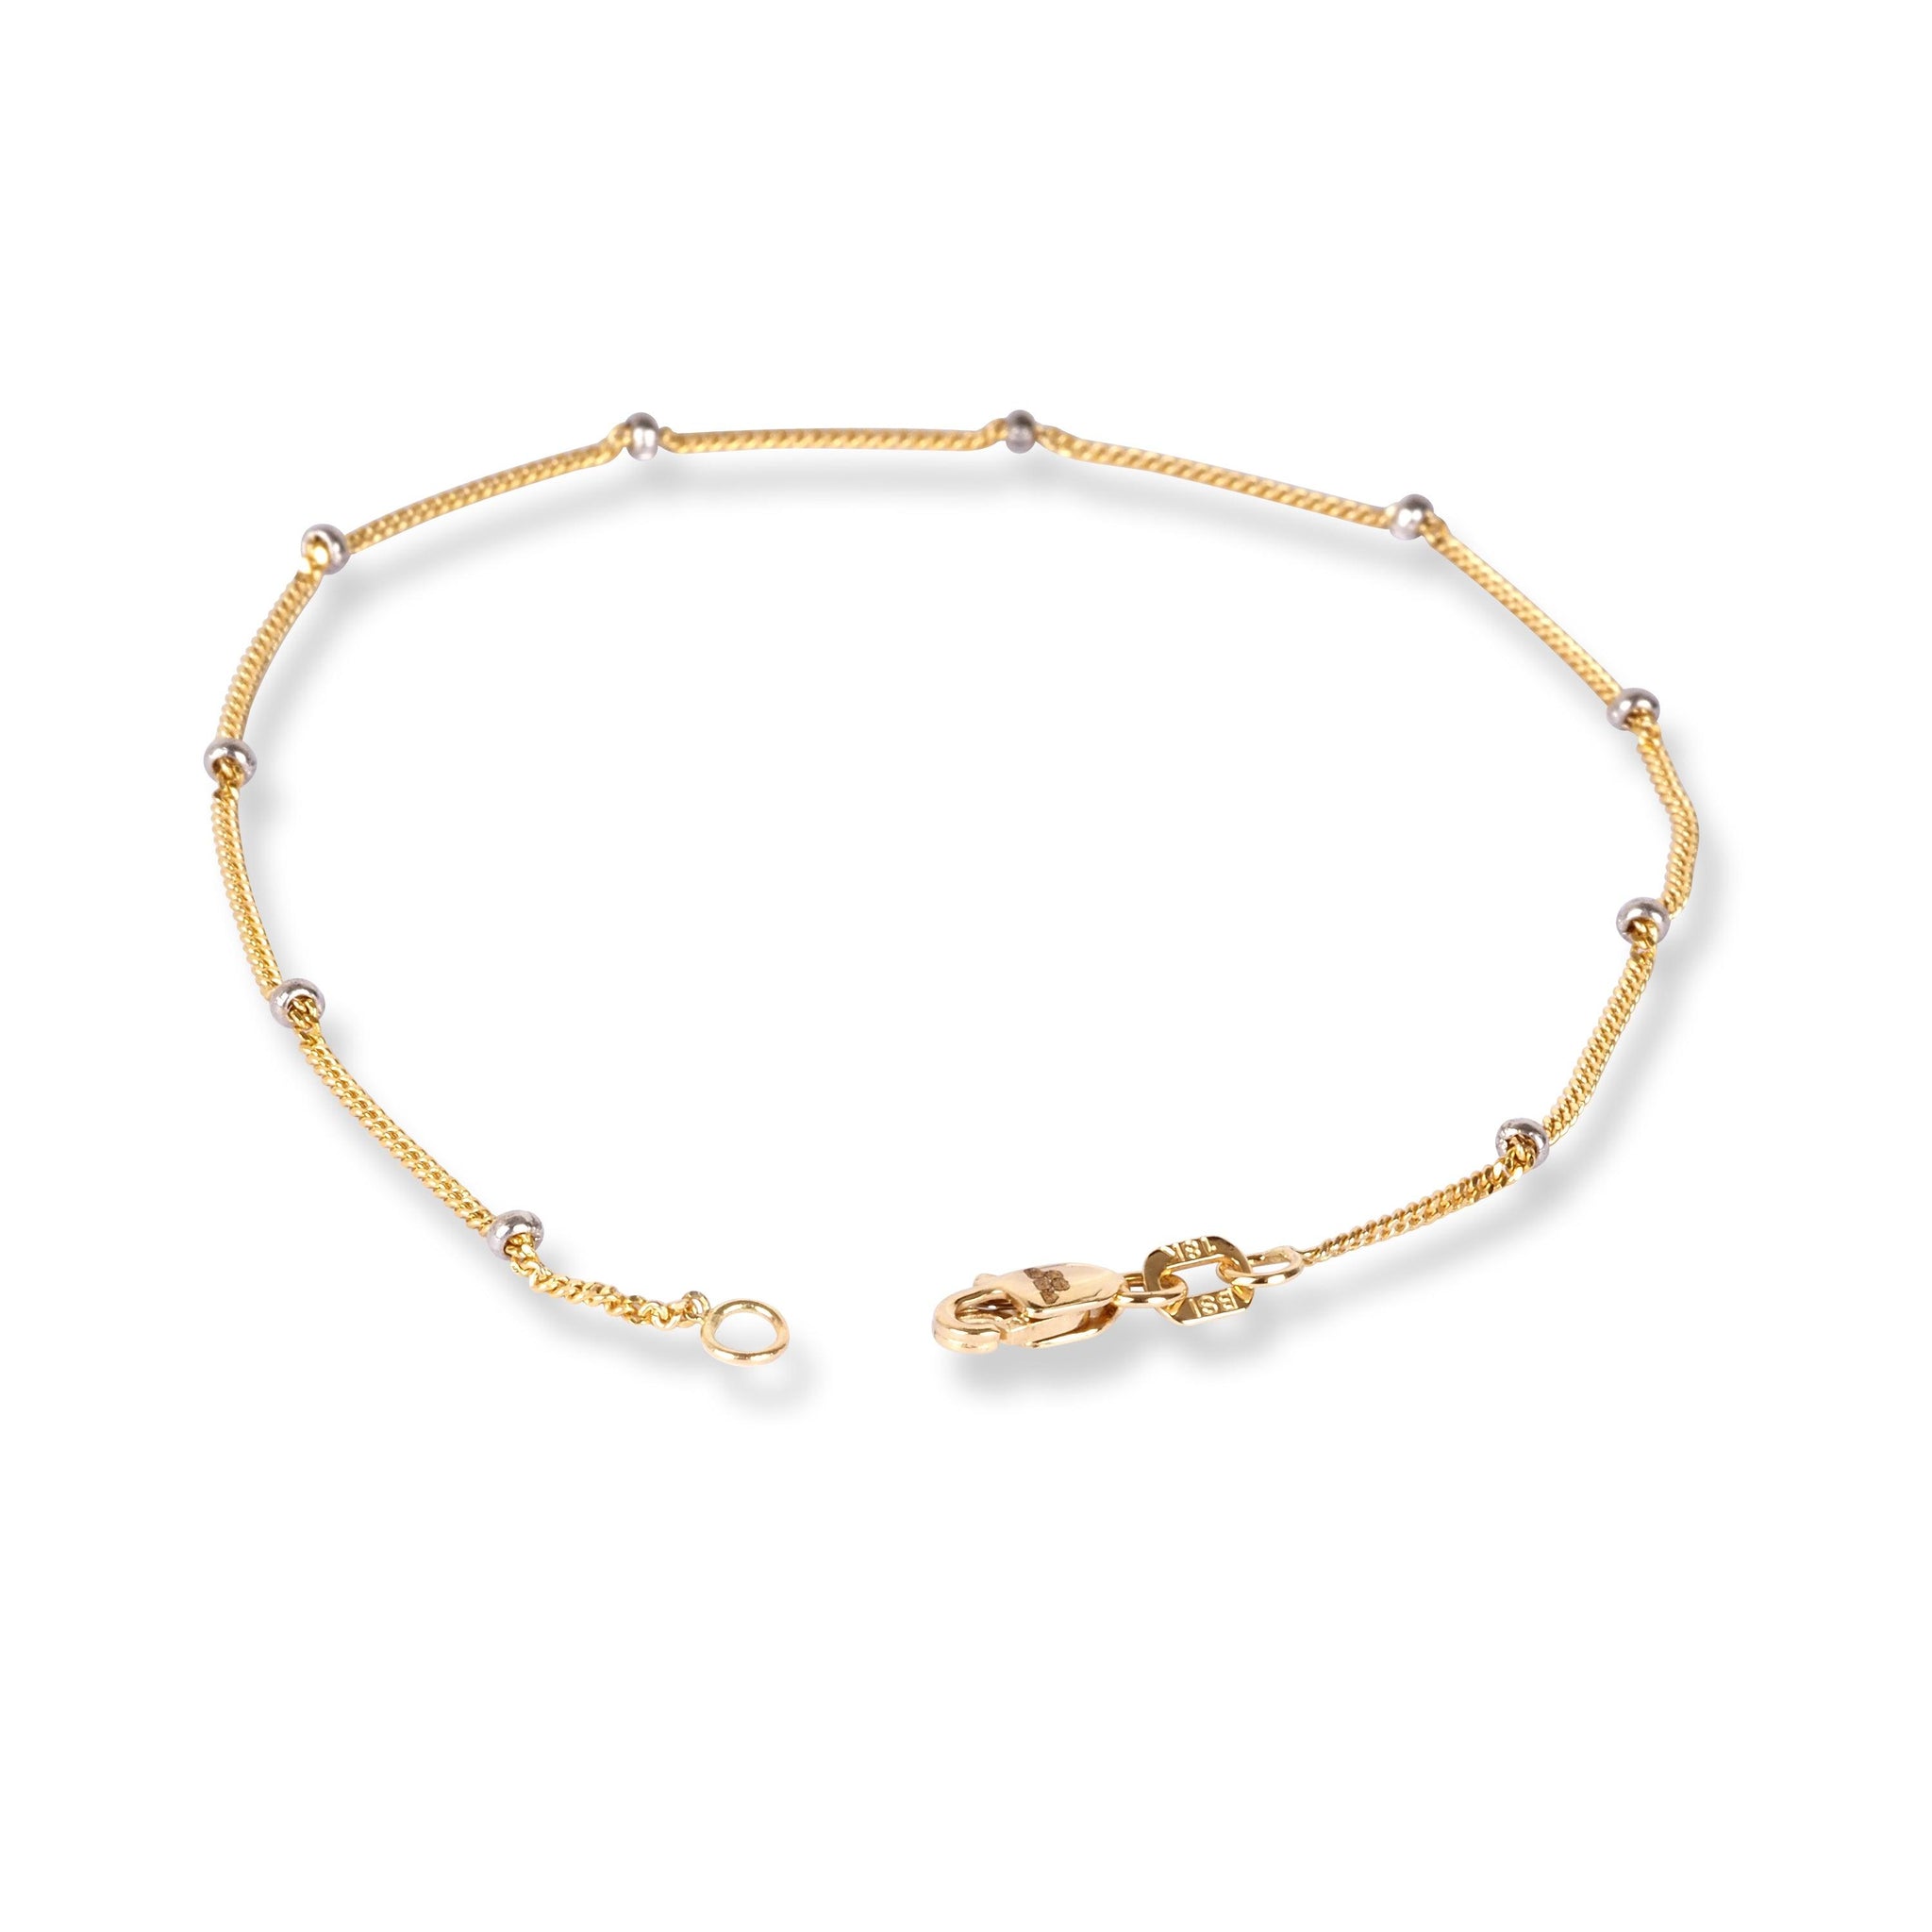 18ct Yellow Gold Bracelet with Rhodium-Plated Beads and Lobster Clasp LBR-8483